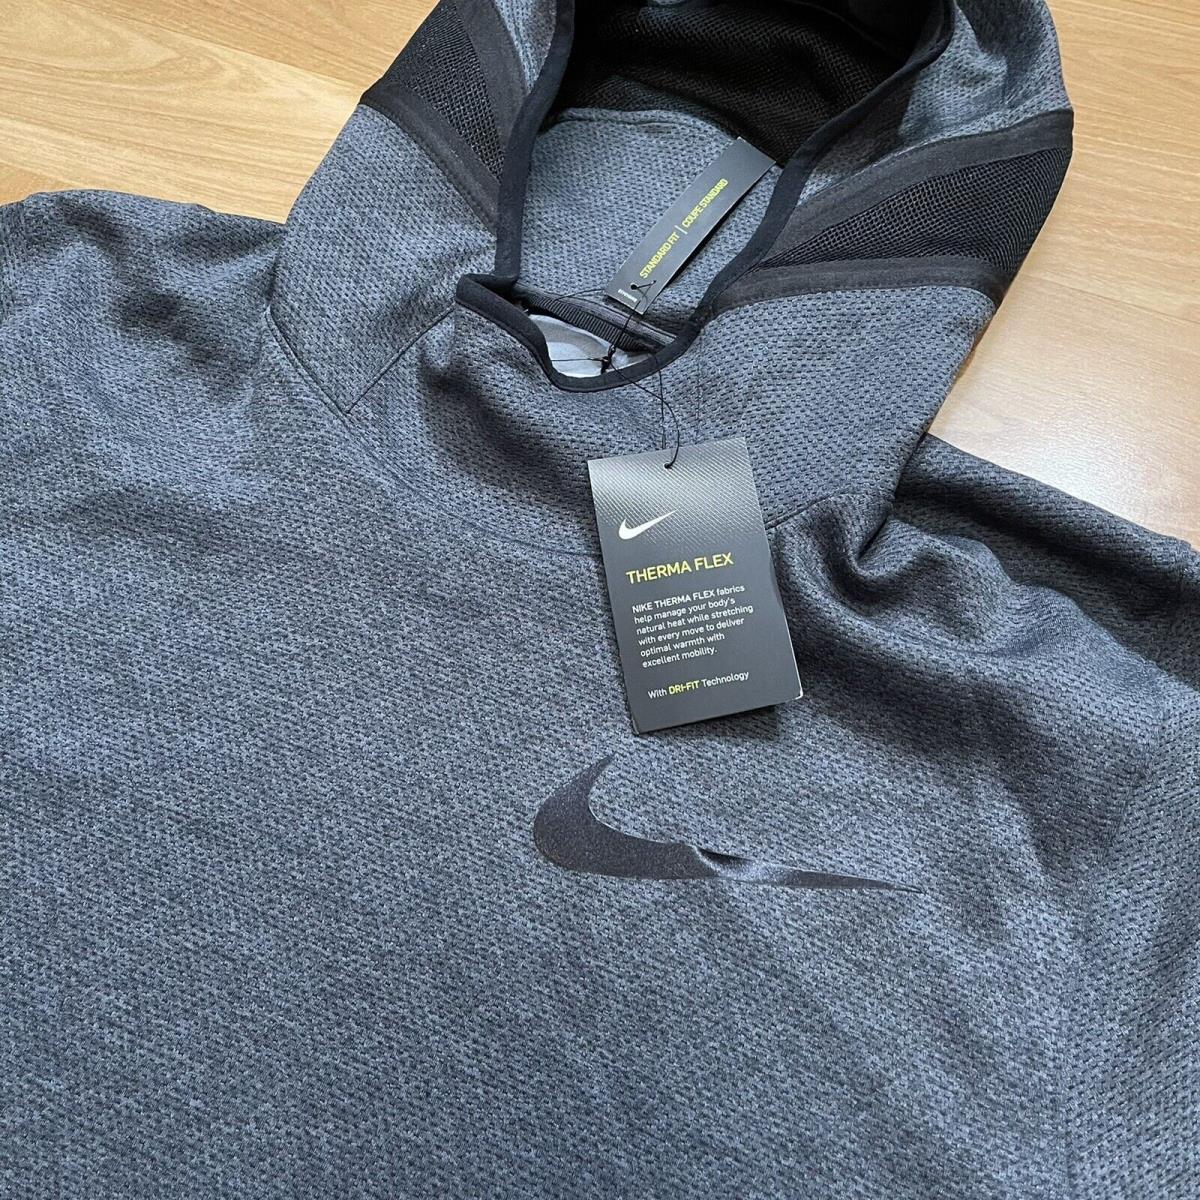 Nike Therma Flex Showtime Pullover Size L Gray Basketball Hoodie AQ4214-032, - Nike clothing Therma Flex Showtime - Gray